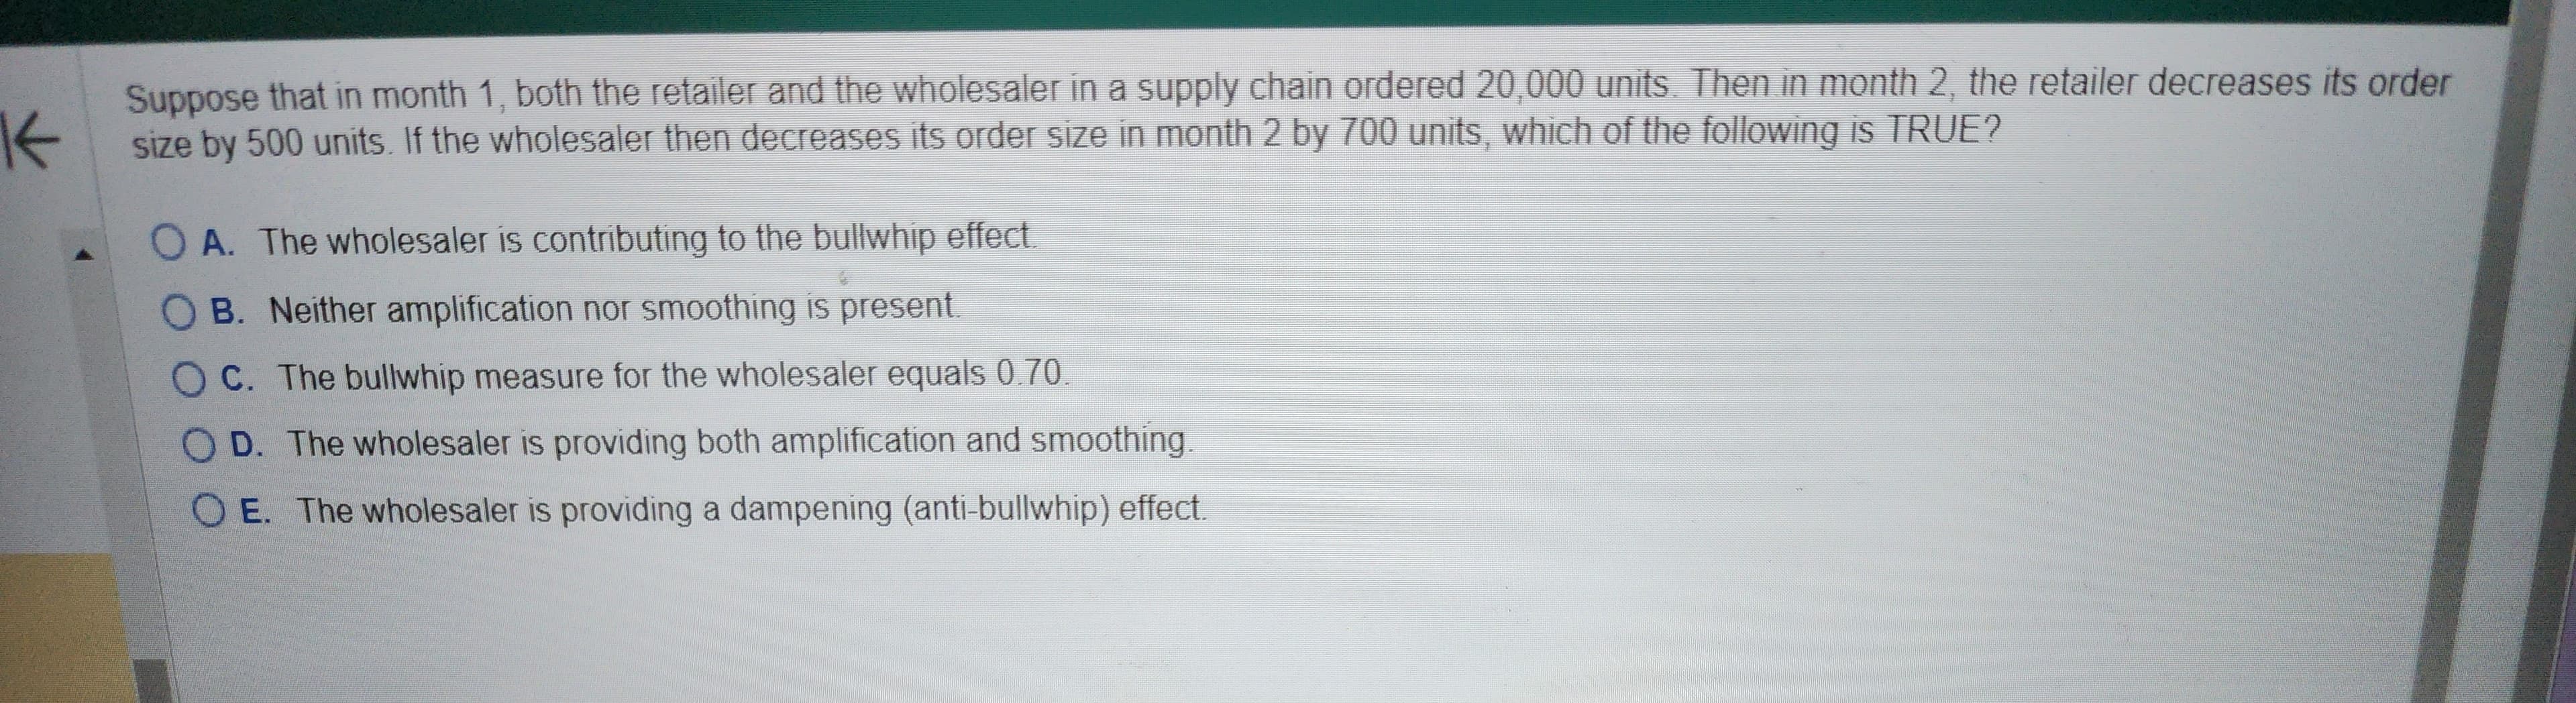 K
Suppose that in month 1, both the retailer and the wholesaler in a supply chain ordered 20,000 units. Then in month 2, the retailer decreases its order
size by 500 units. If the wholesaler then decreases its order size in month 2 by 700 units, which of the following is TRUE?
OA. The wholesaler is contributing to the bullwhip effect.
OB. Neither amplification nor smoothing is present.
OC. The bullwhip measure for the wholesaler equals 0.70.
OD. The wholesaler is providing both amplification and smoothing.
OE. The wholesaler is providing a dampening (anti-bullwhip) effect.